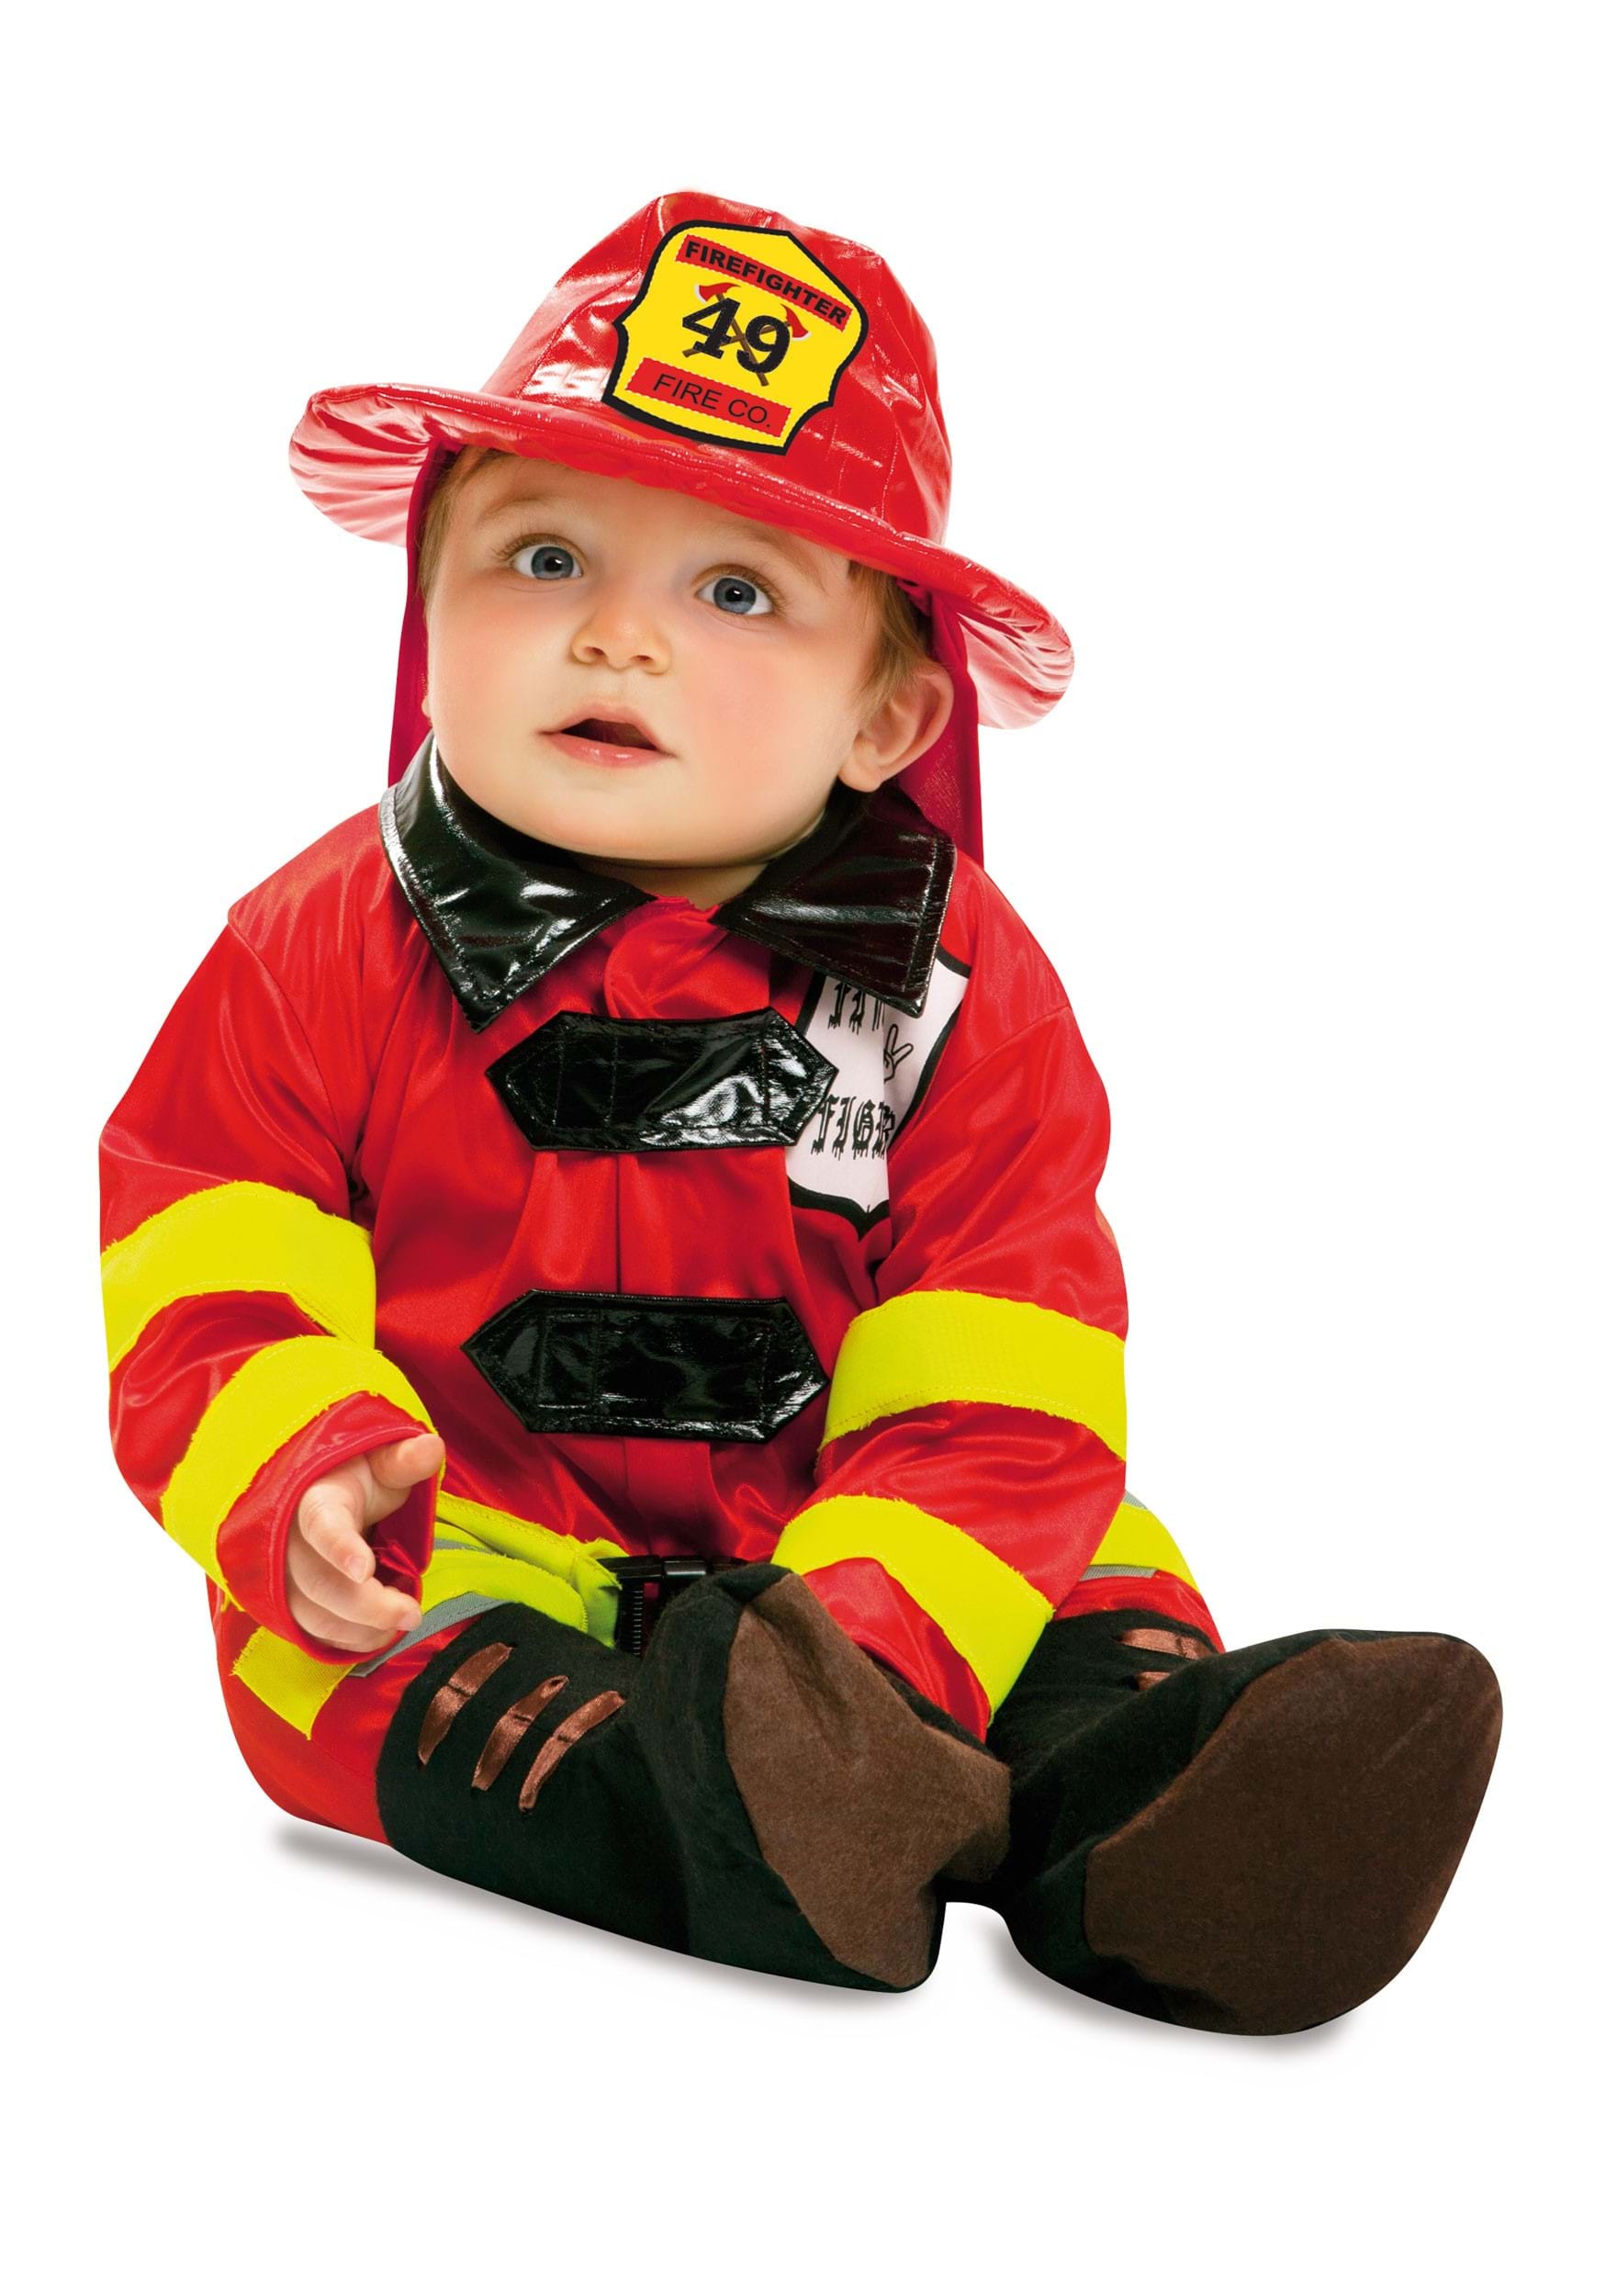 Photos - Fancy Dress MOM Firekid Costume for Infants Black/Red/Yellow